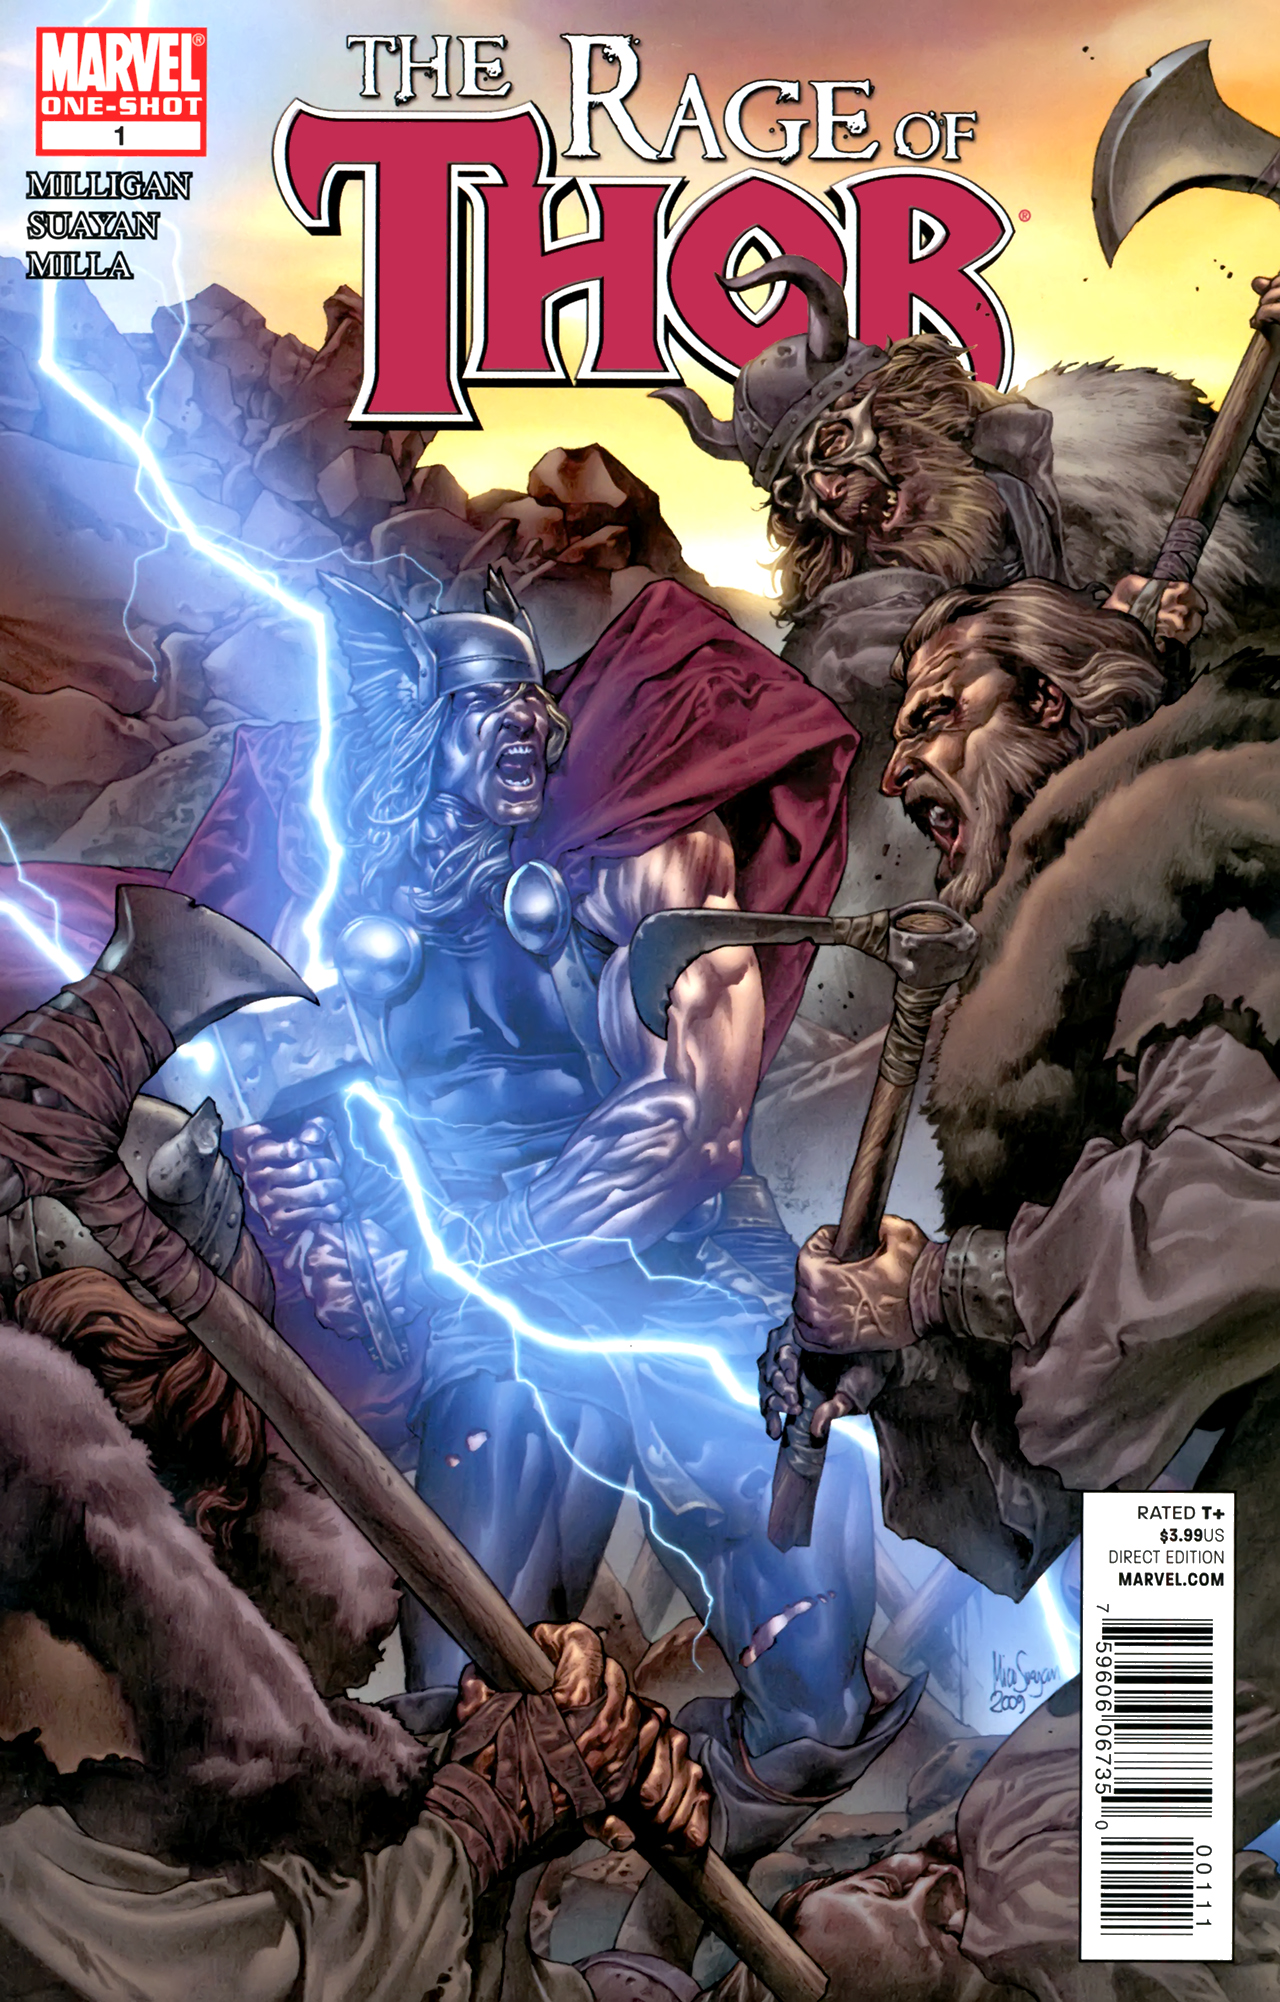 Read online Thor: The Rage of Thor comic -  Issue # Full - 1